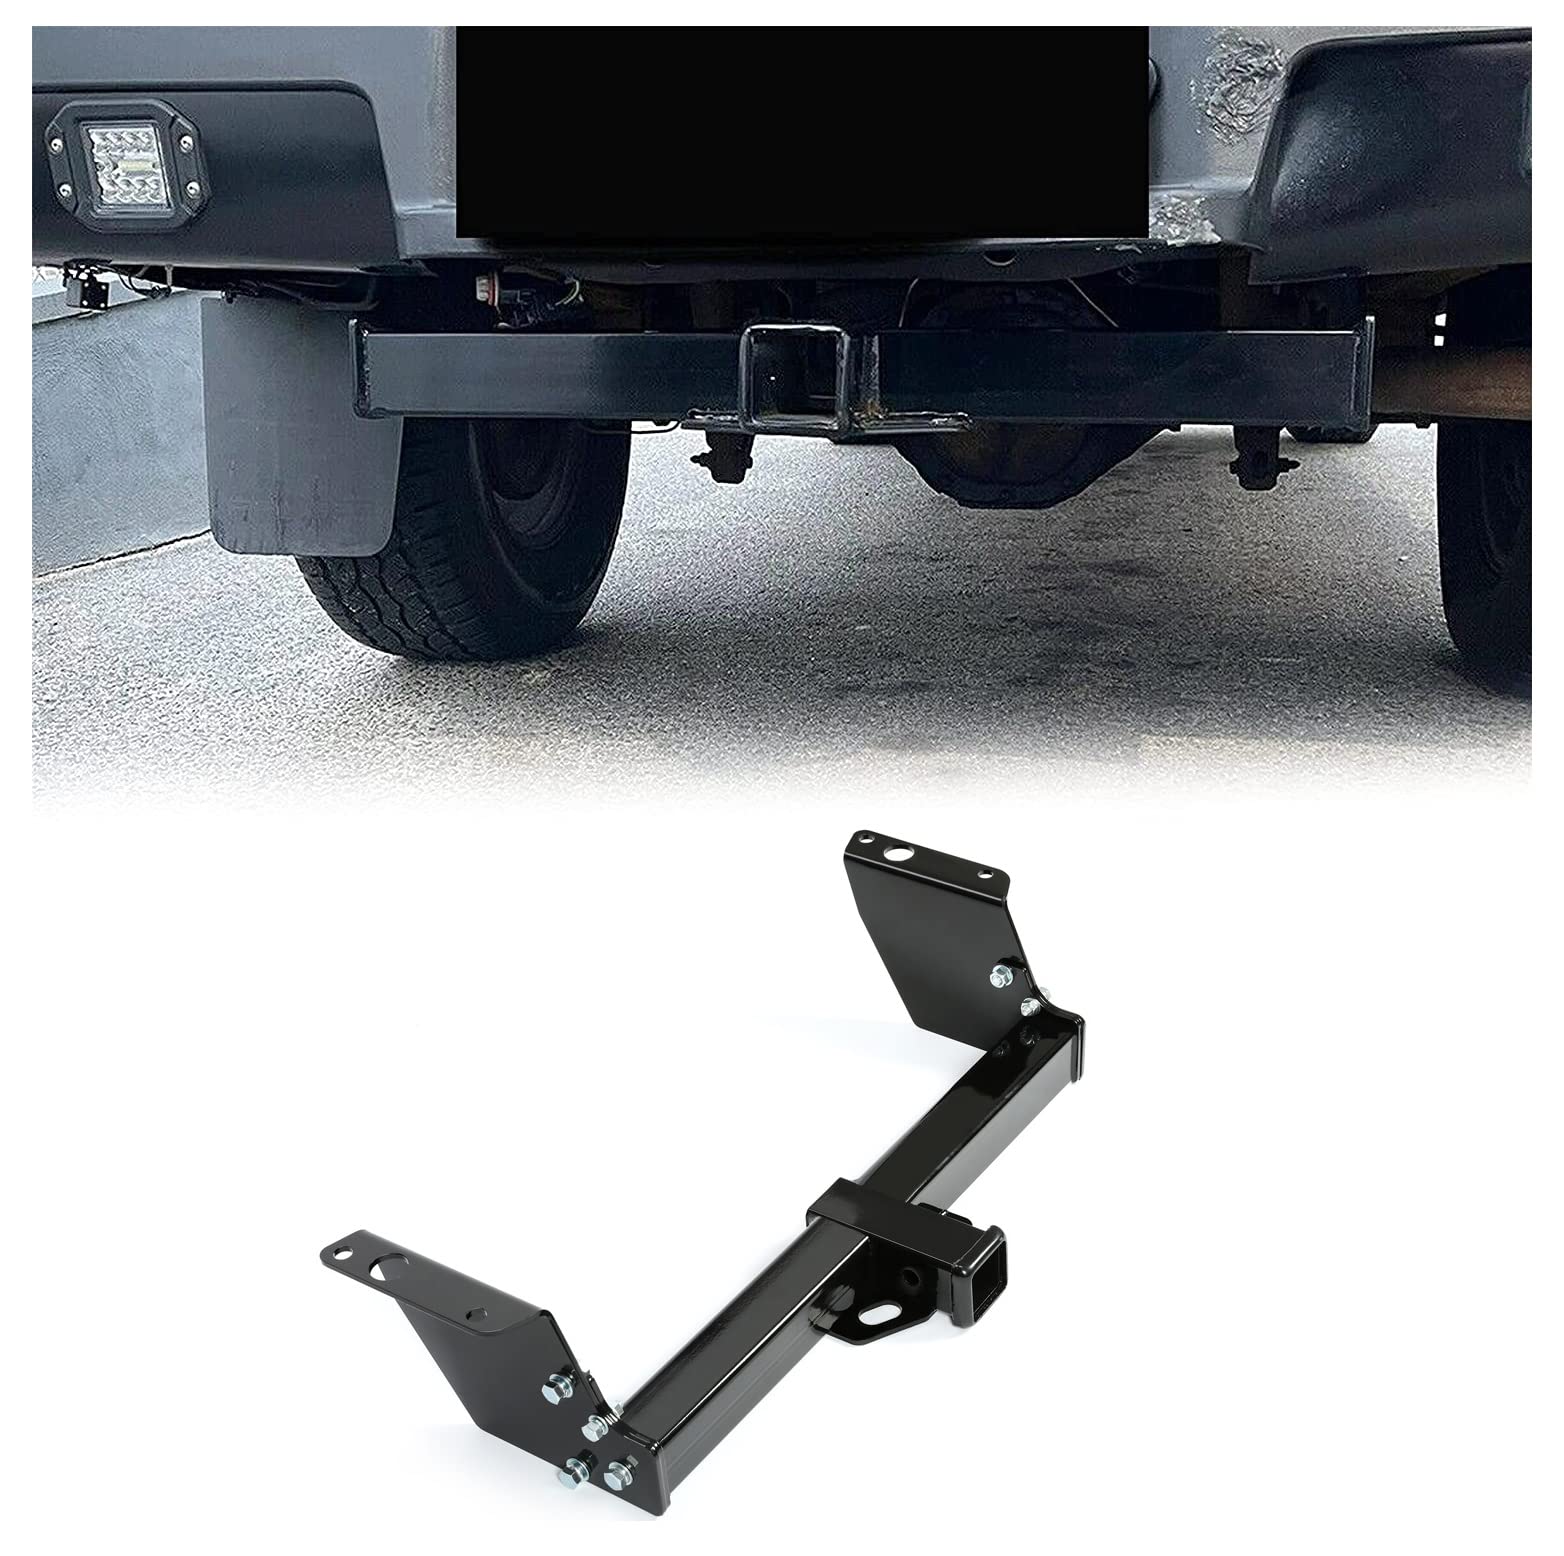 Amazon.com: Class 3 Trailer Hitch 2 Inch Receiver Compatible with 1983-2011 Ford  Ranger & 1994-2009 Mazda B2300 B3000 B4000 Pickup : Automotive